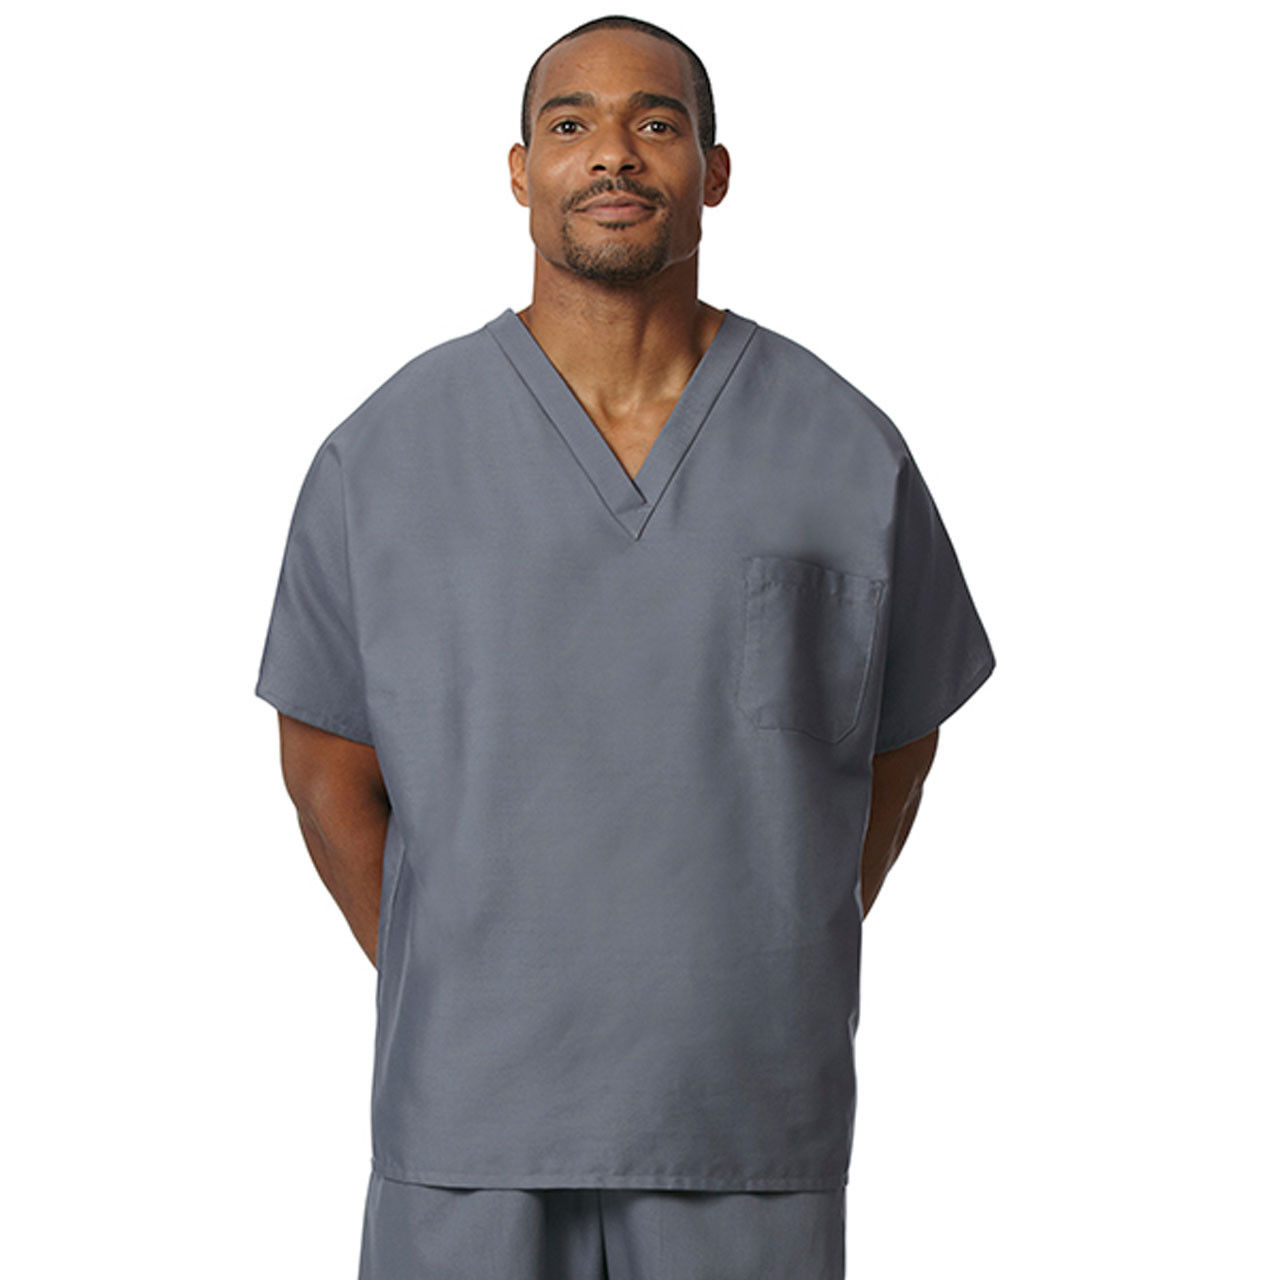 What is the color of the Womens and Mens Tall Scrub Tops?